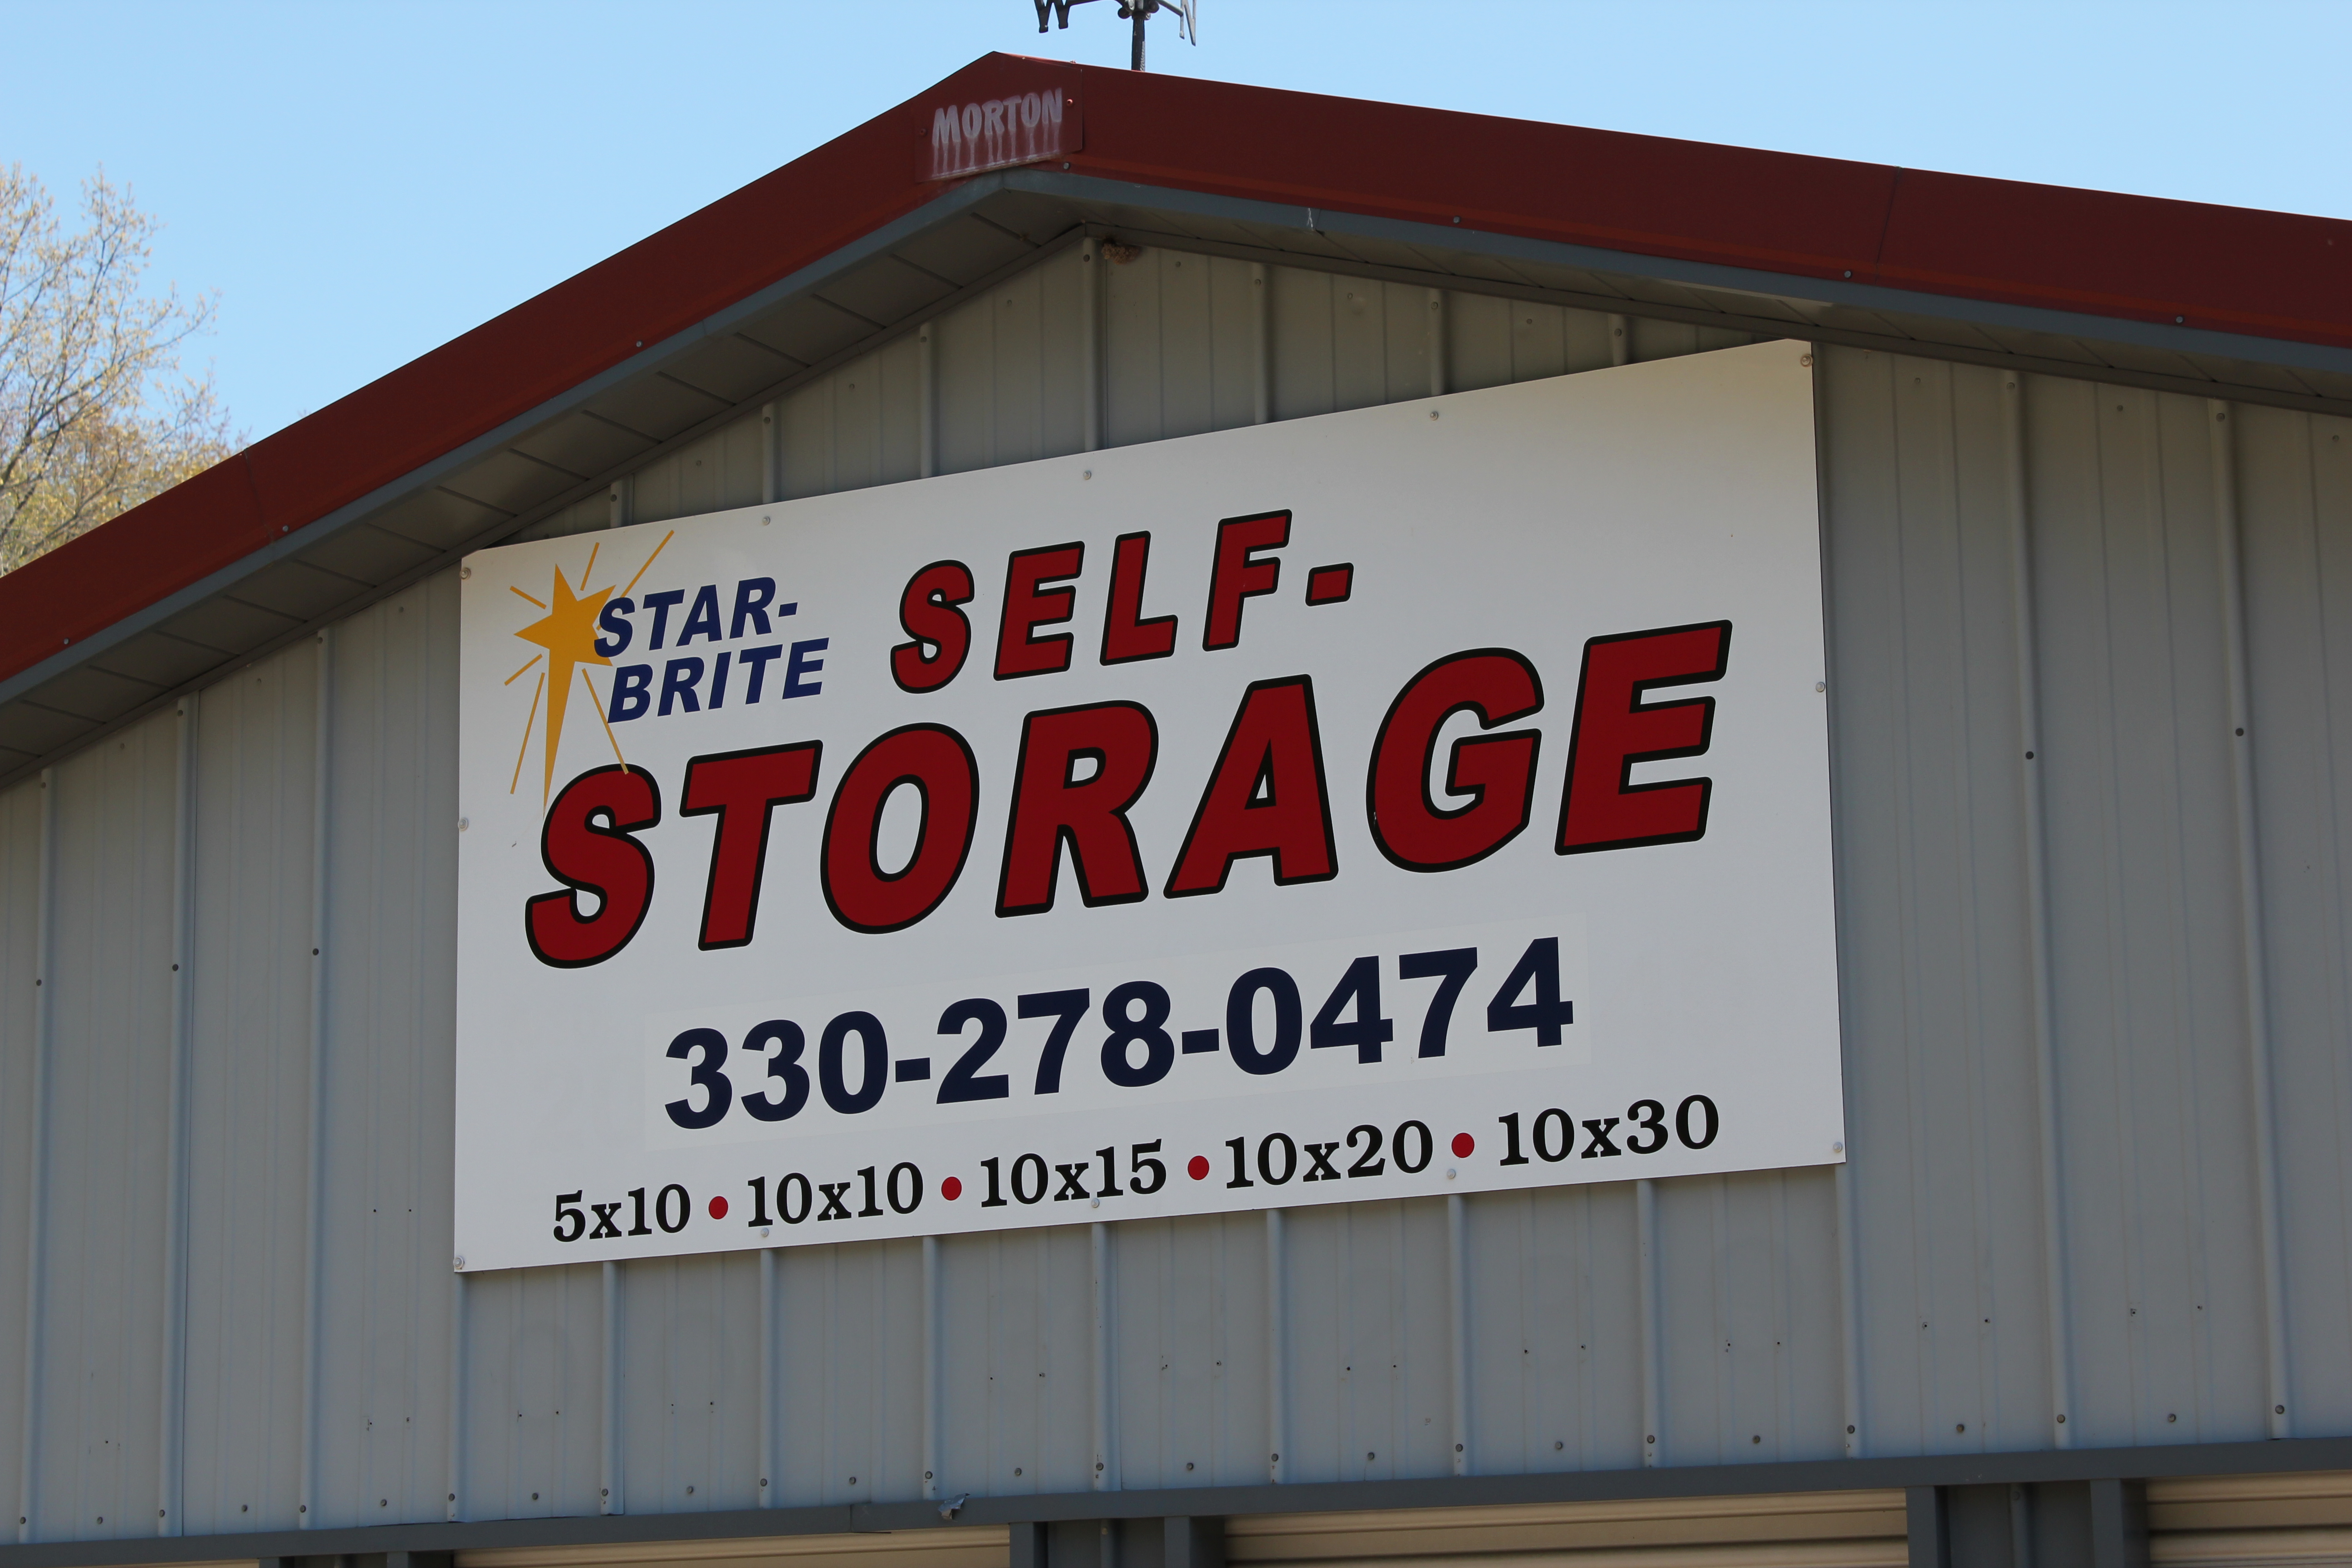 Looking for extra storage space? Star-Brite Storage has seven storage facilities near you.
Conveniently located in East Central Ohio, our storage rentals are well maintained, are clean and provide ample space.

So when you need to store furniture, office files, cars, boats or seasonal items like lawn mowers, snowblowers and holiday decorations, think of Star-Brite as an extension of your home or office.

Well lit and secure, the storage units range in size from 5-by-10 feet that will store boxes, totes, appliances and small furniture to a 10-by-30-foot unit that will hold the entire contents of a four-bedroom house. For those looking to store a boat or recreational vehicle, we also have 13-by-40-foot storage space.